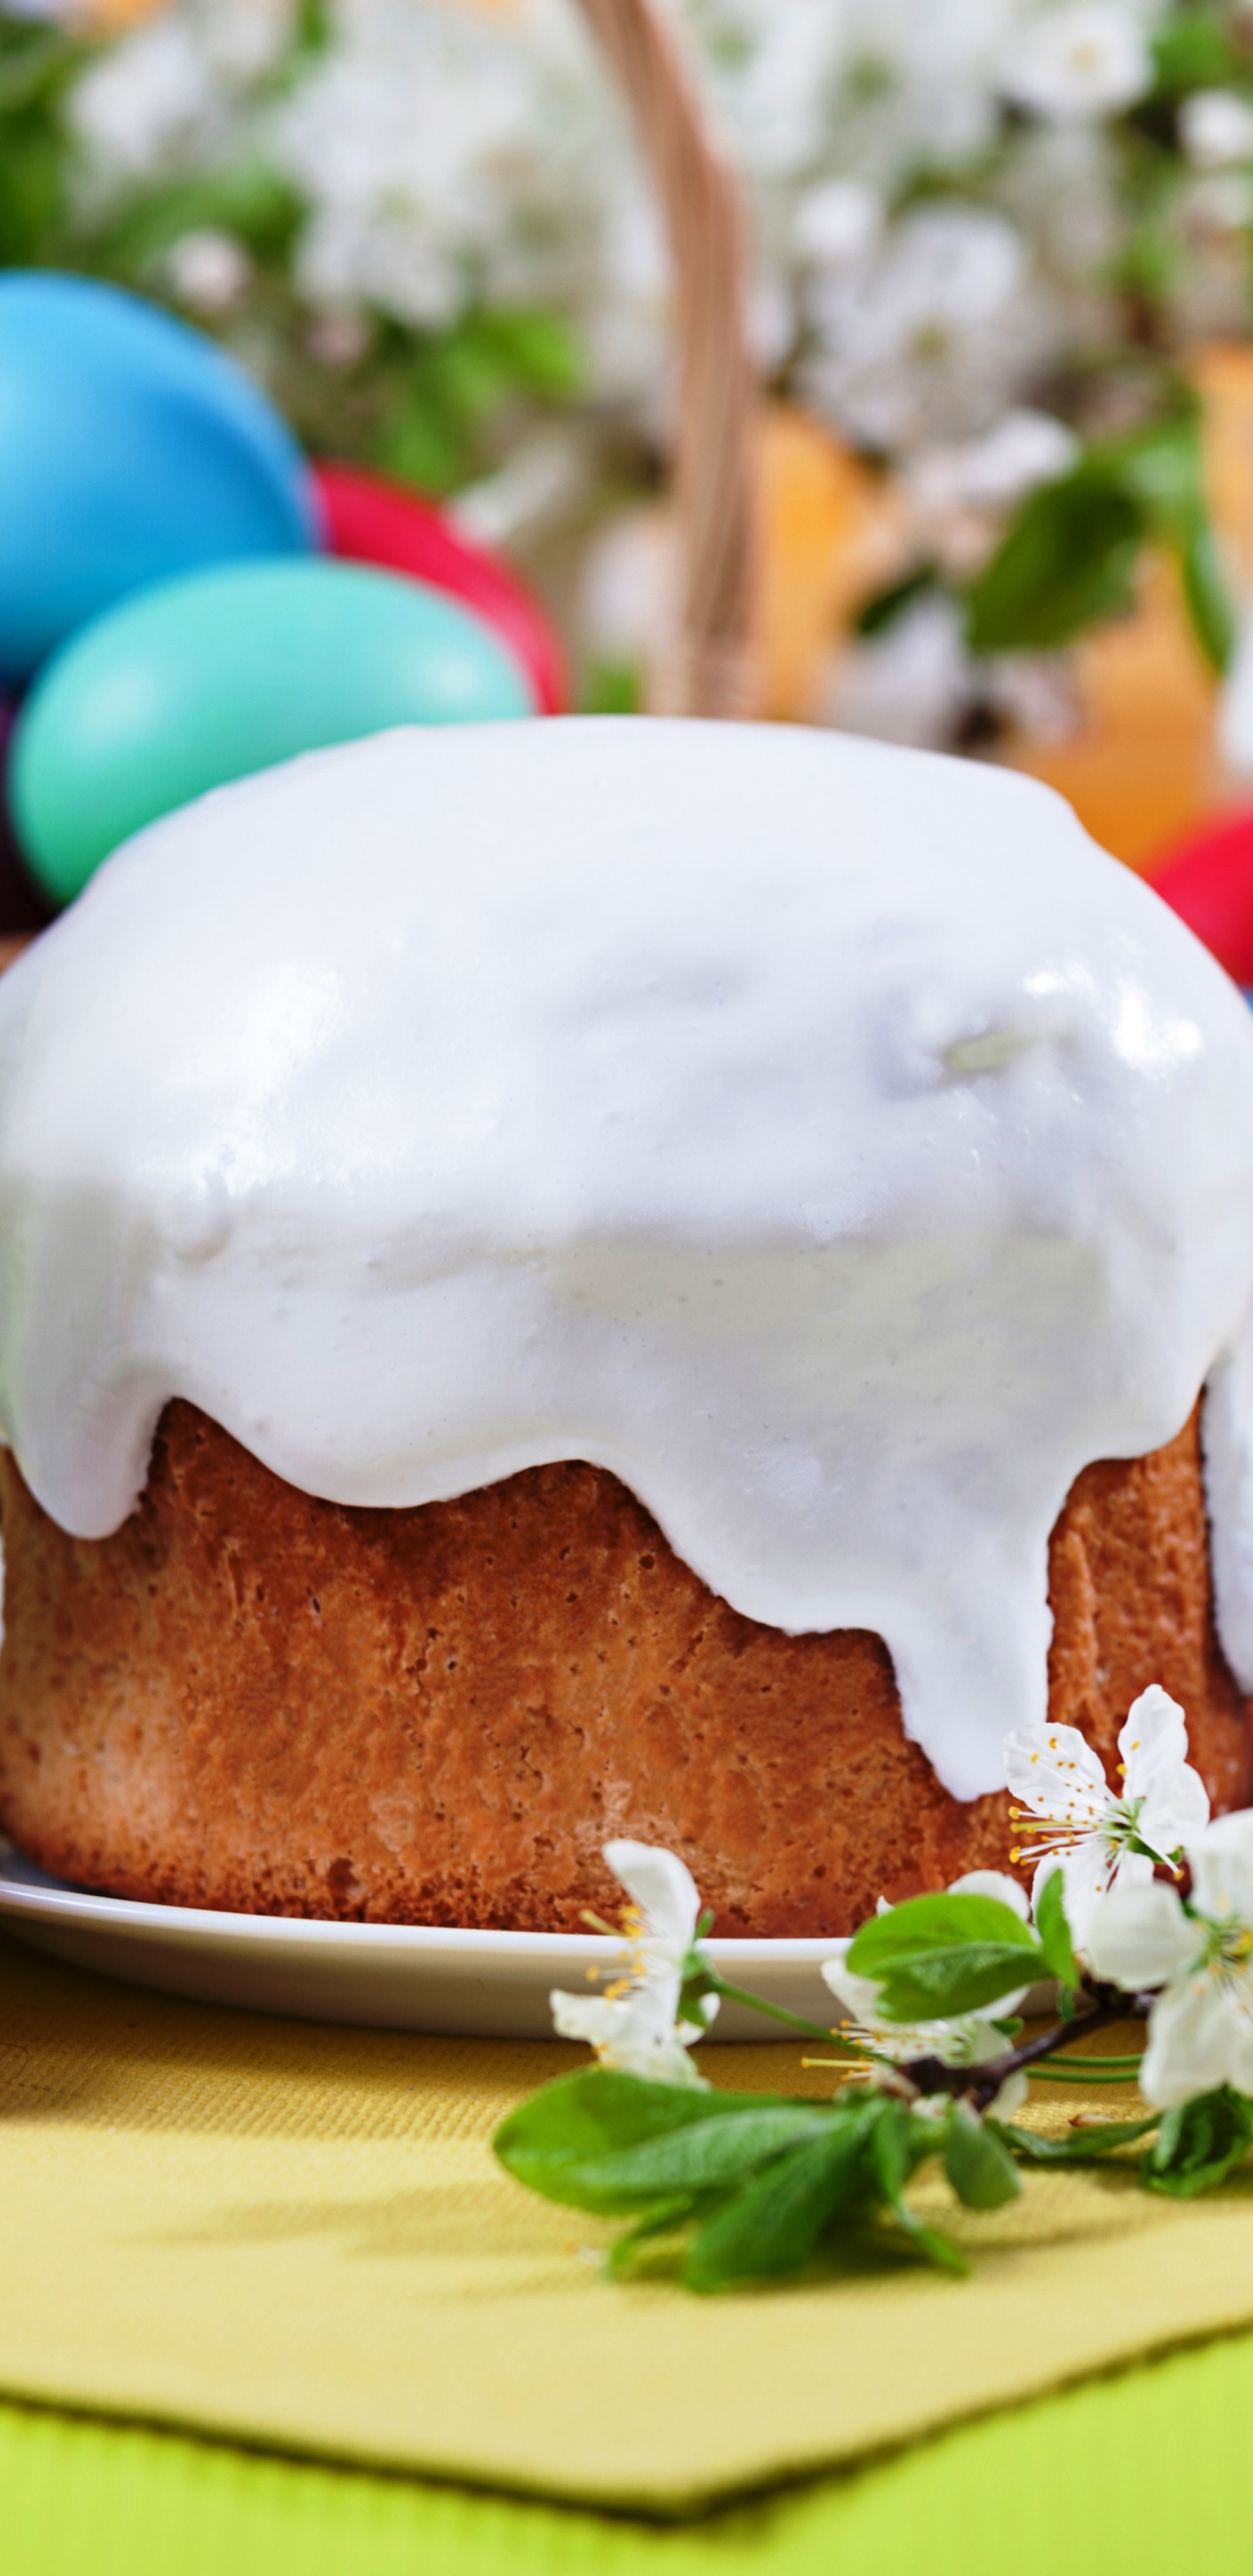 Kulich, Easter, Easter Egg, Food, Paska. Wallpaper in 1440x2960 Resolution